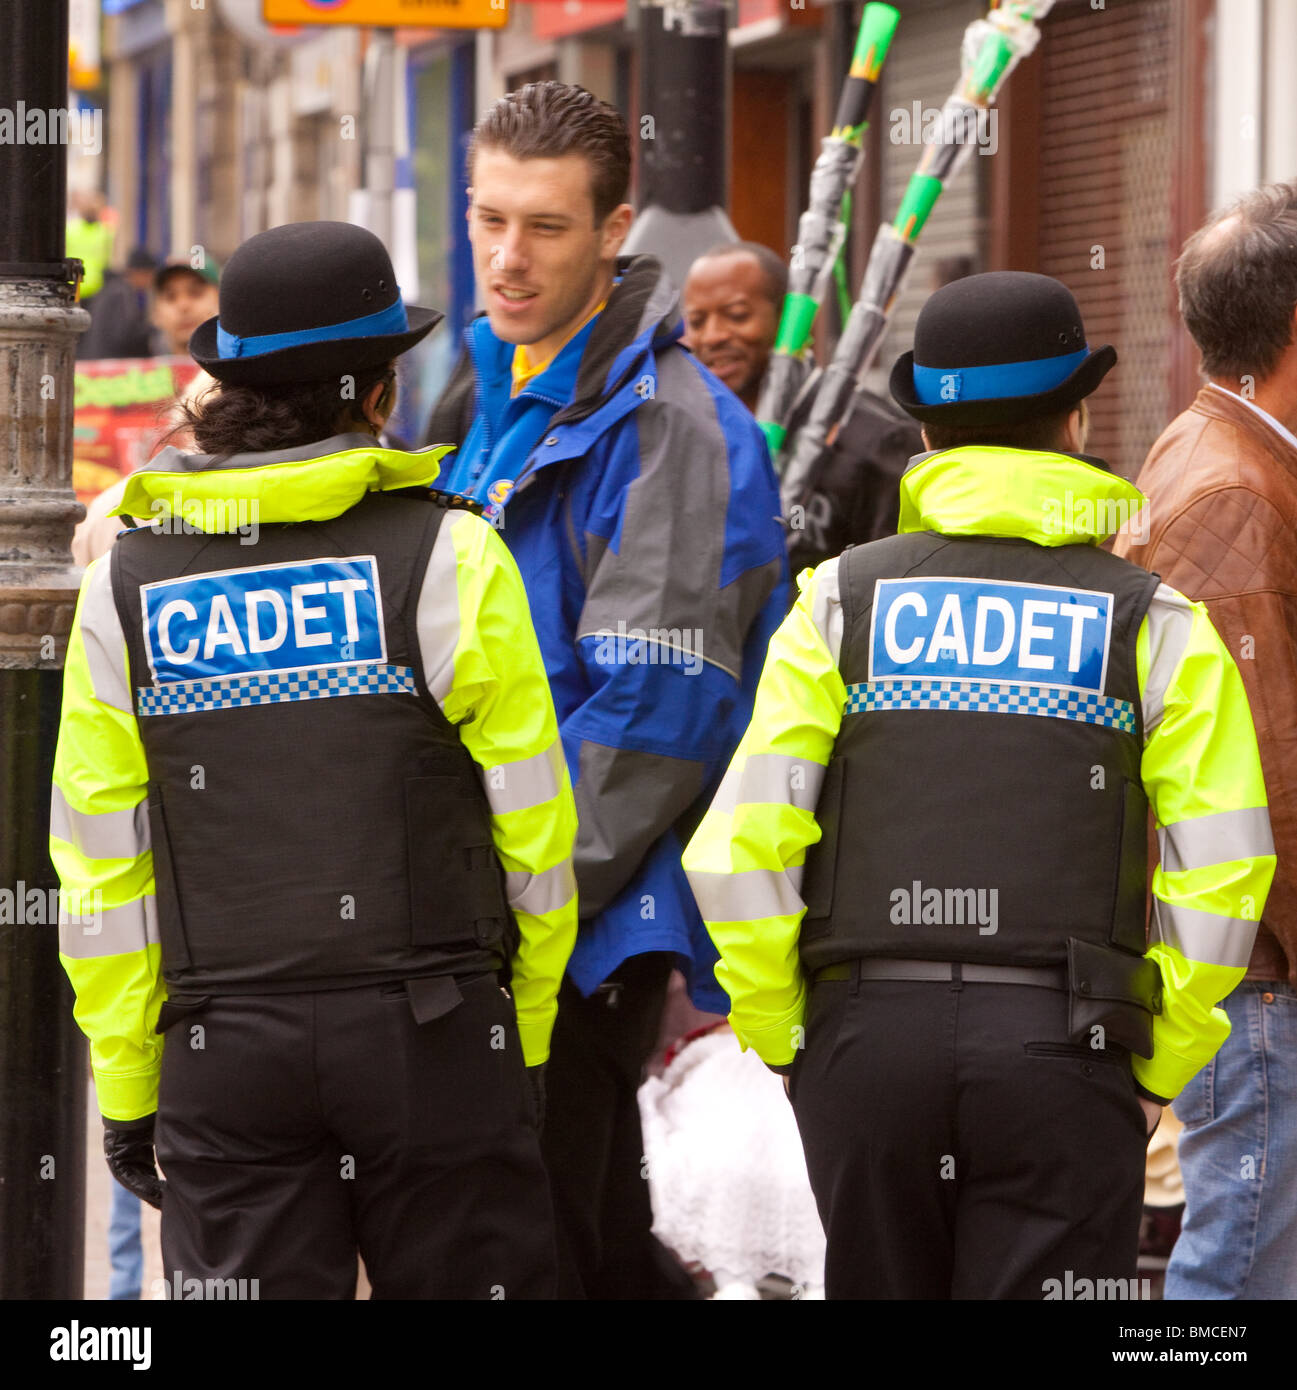 Two Police cadets talking to a member of the public Stock Photo